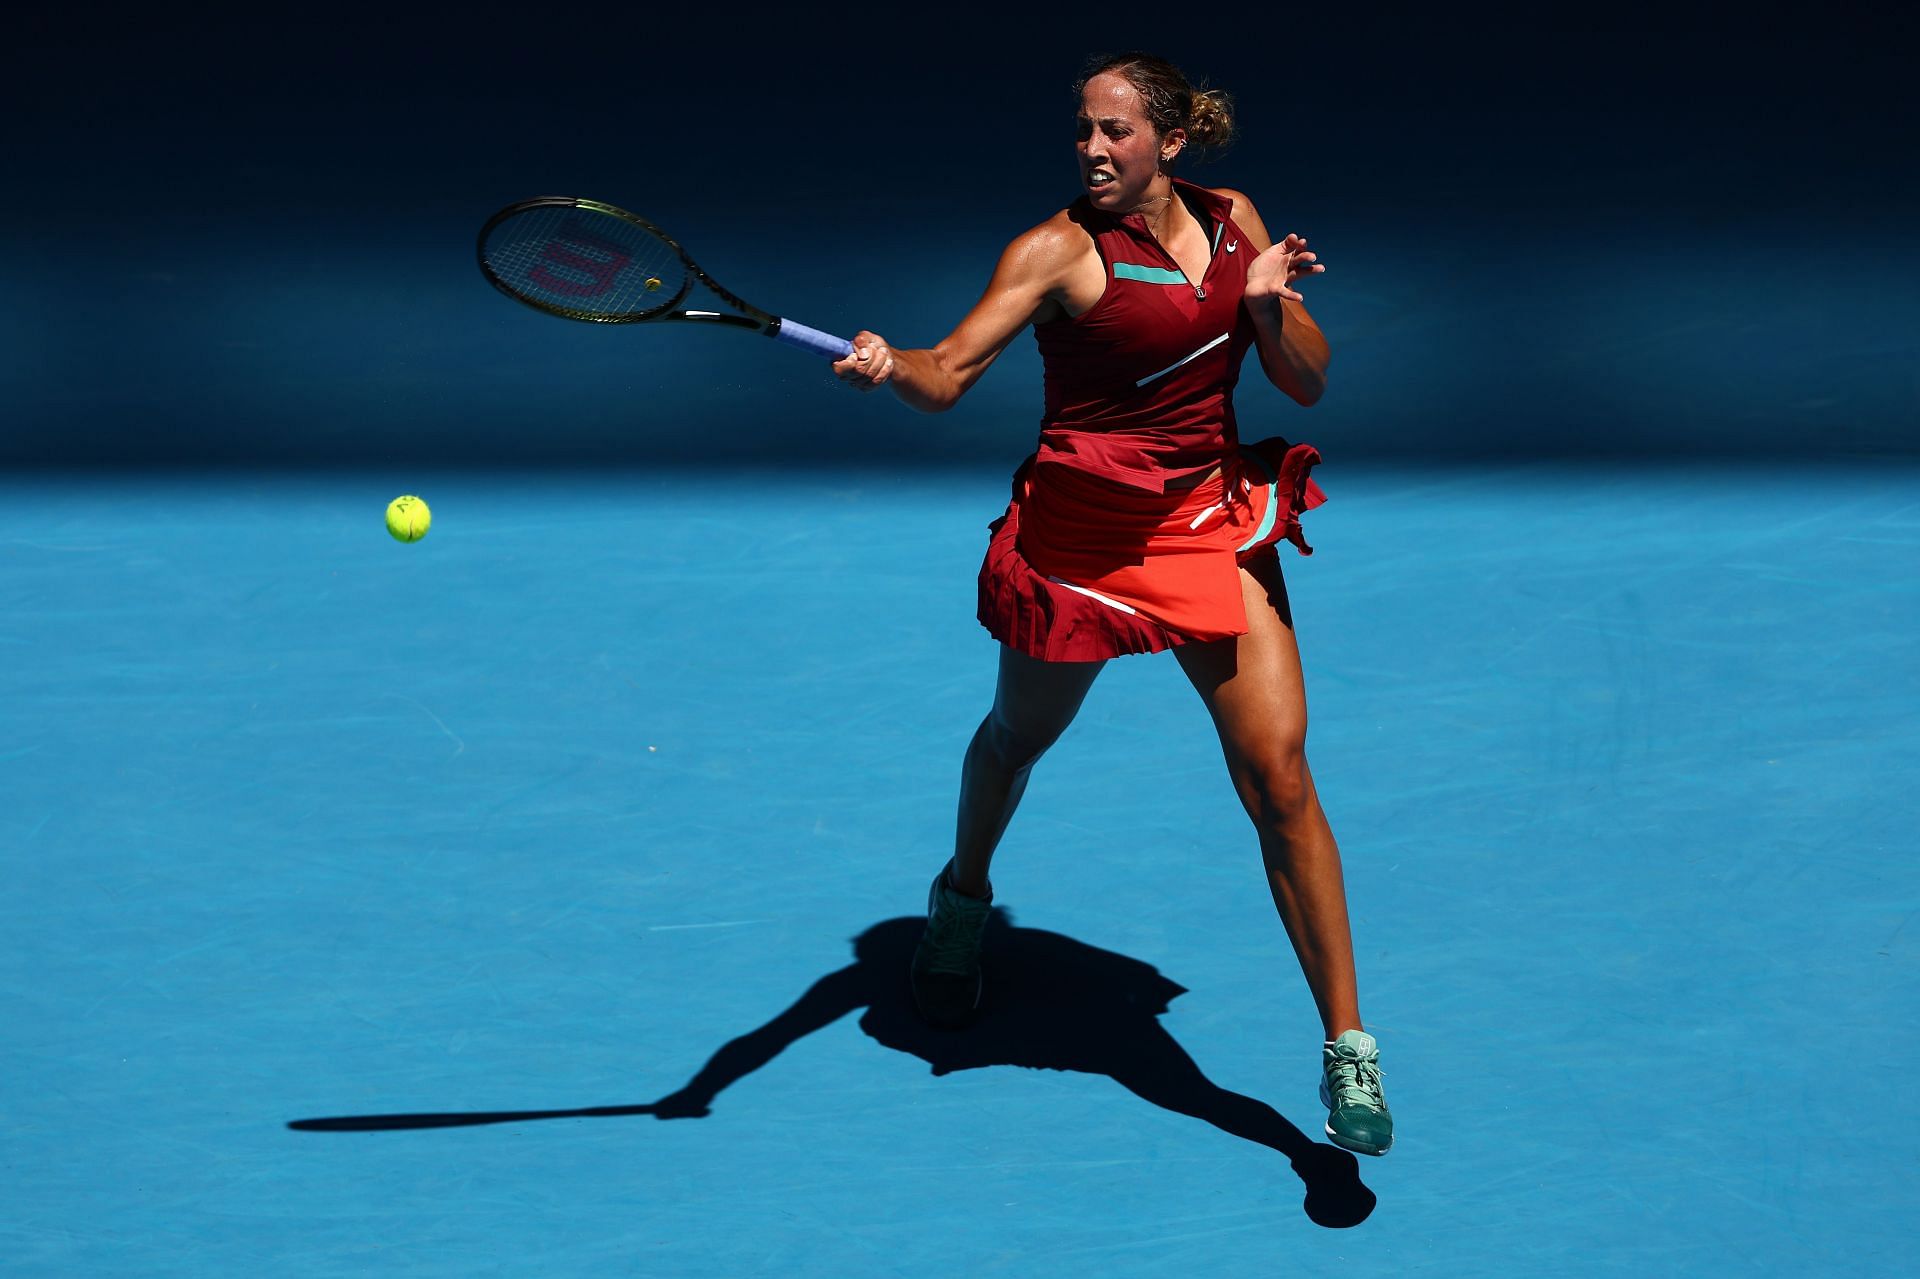 Madison Keys faces off against Ashleigh Barty in the semifinals of the 2022 Australian Open